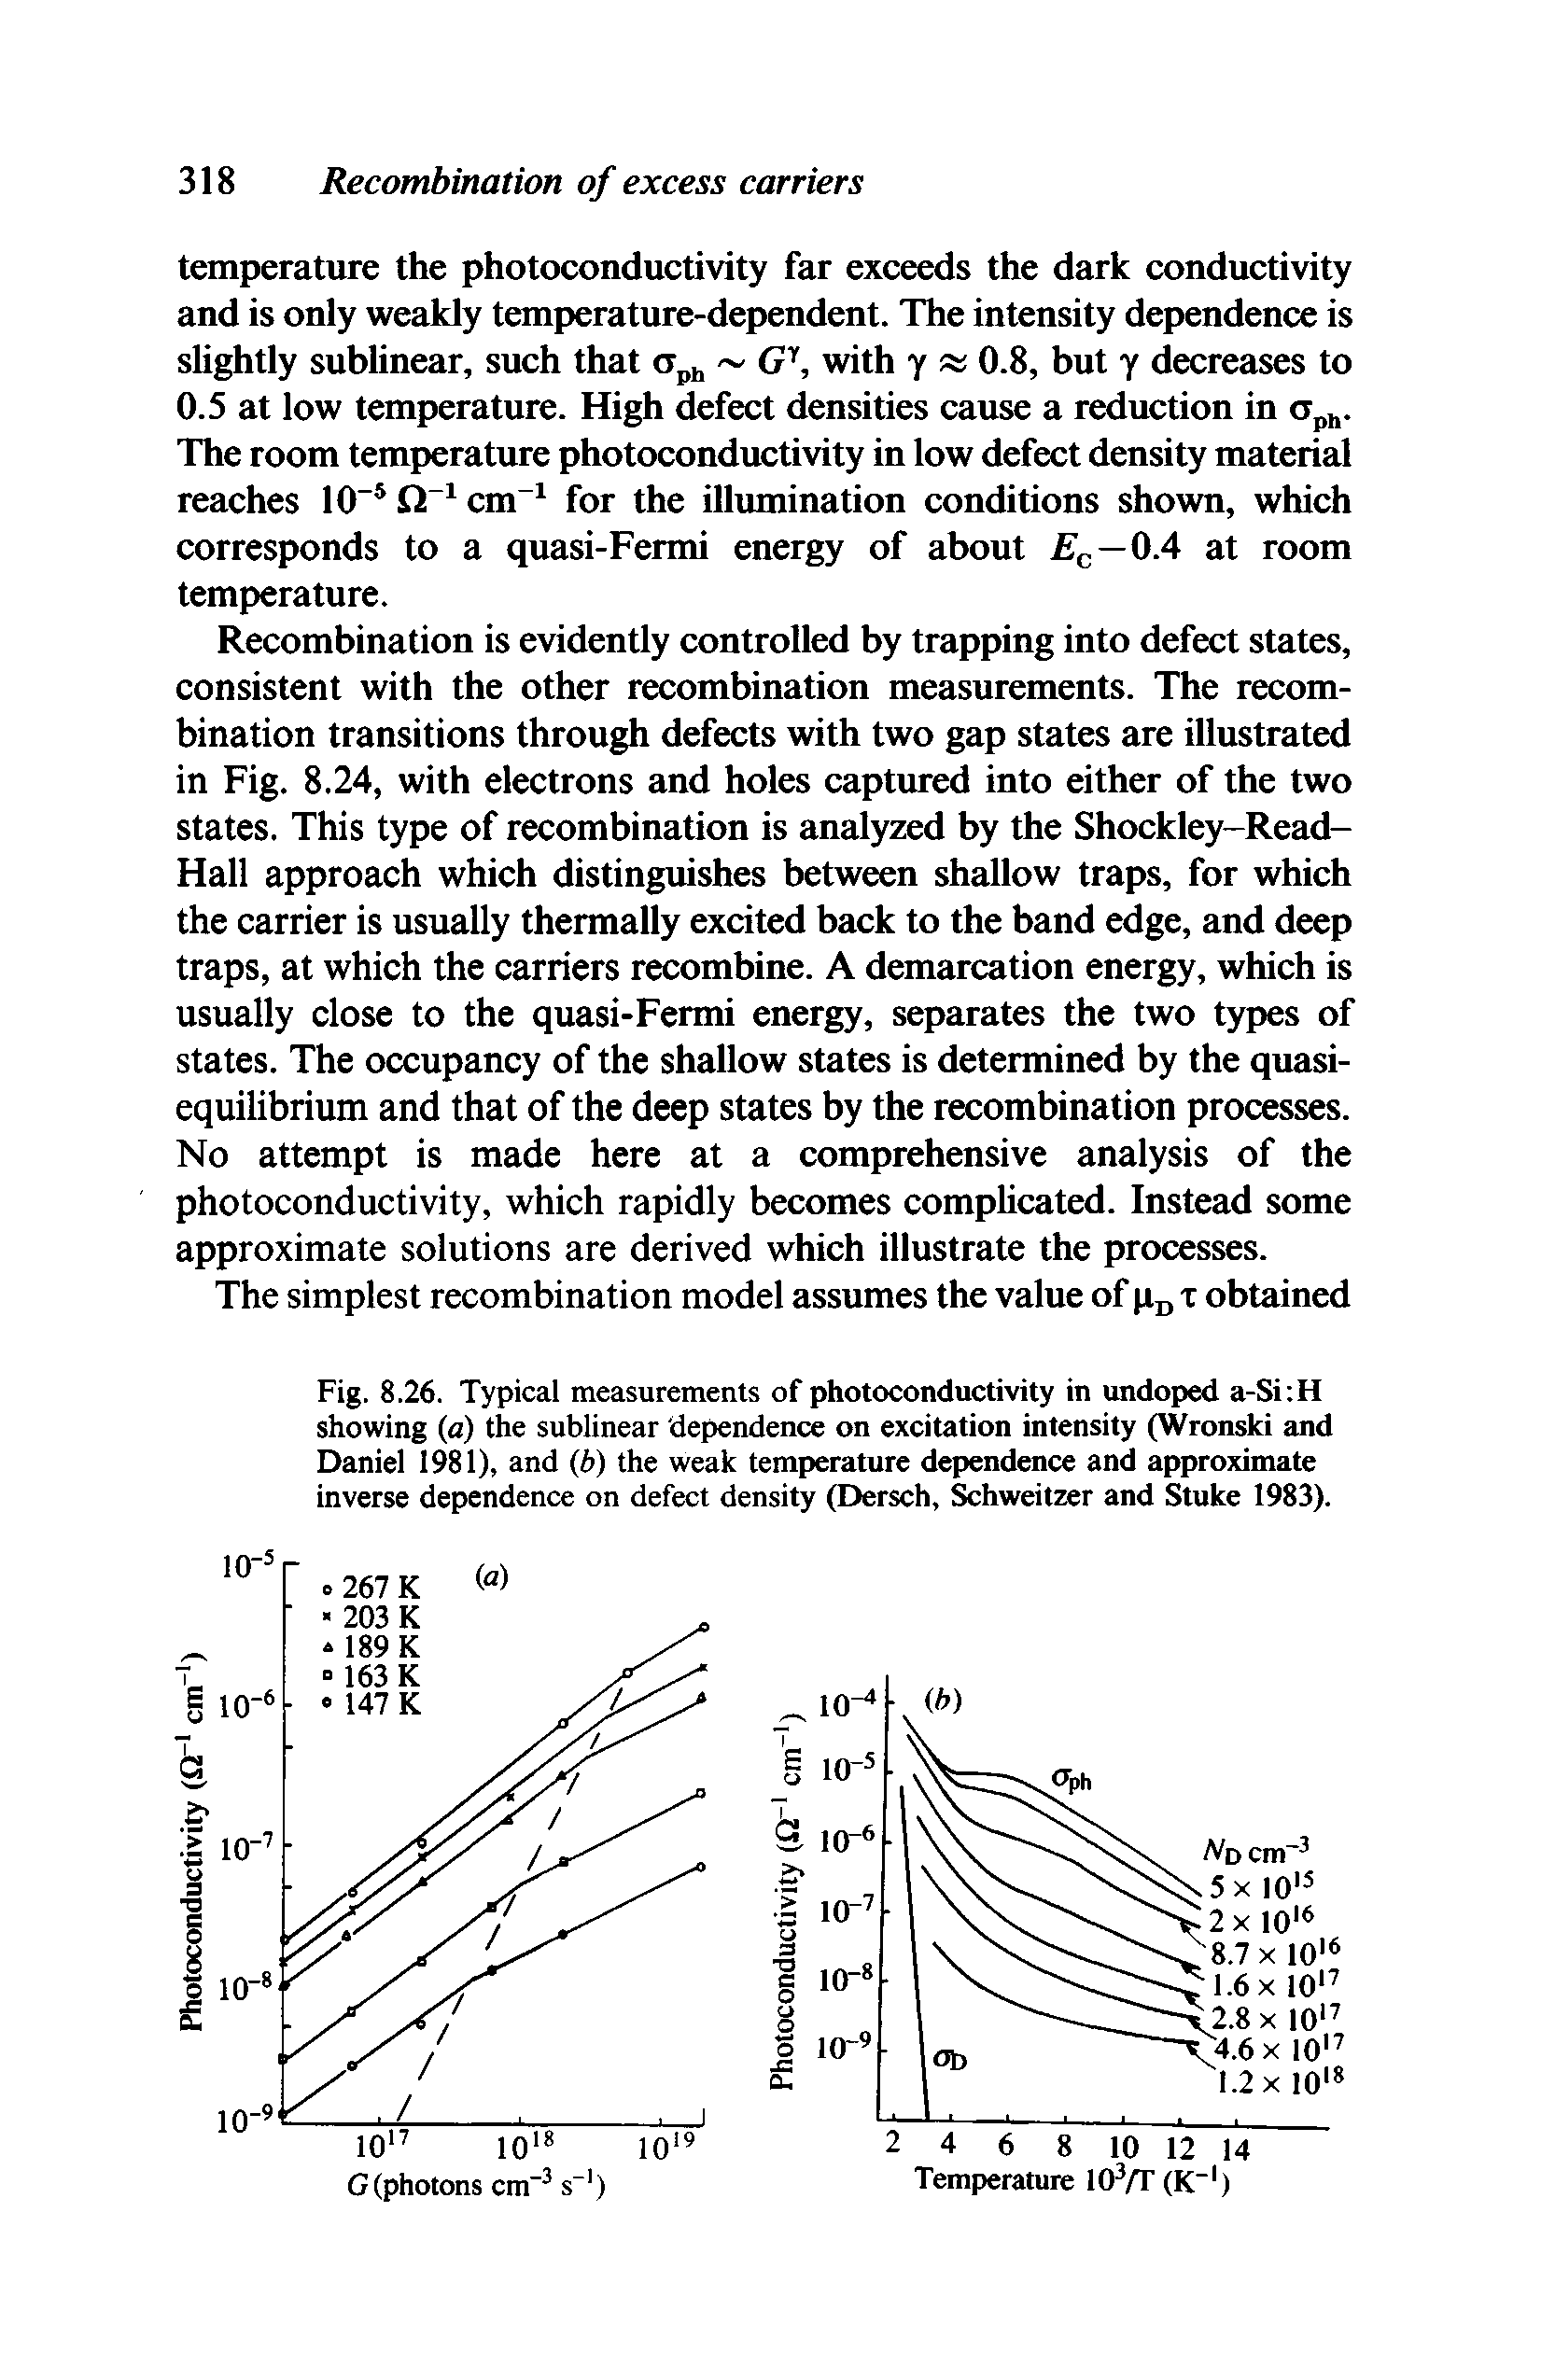 Fig. 8.26. Typical measurements of photoconductivity in undoped a-Si H showing (a) the sublinear dependence on excitation intensity (Wronski and Daniel 1981), and (b) the weak temperature dependence and approximate inverse dependence on defect density (Dersch, Schweitzer and Stuke 1983).